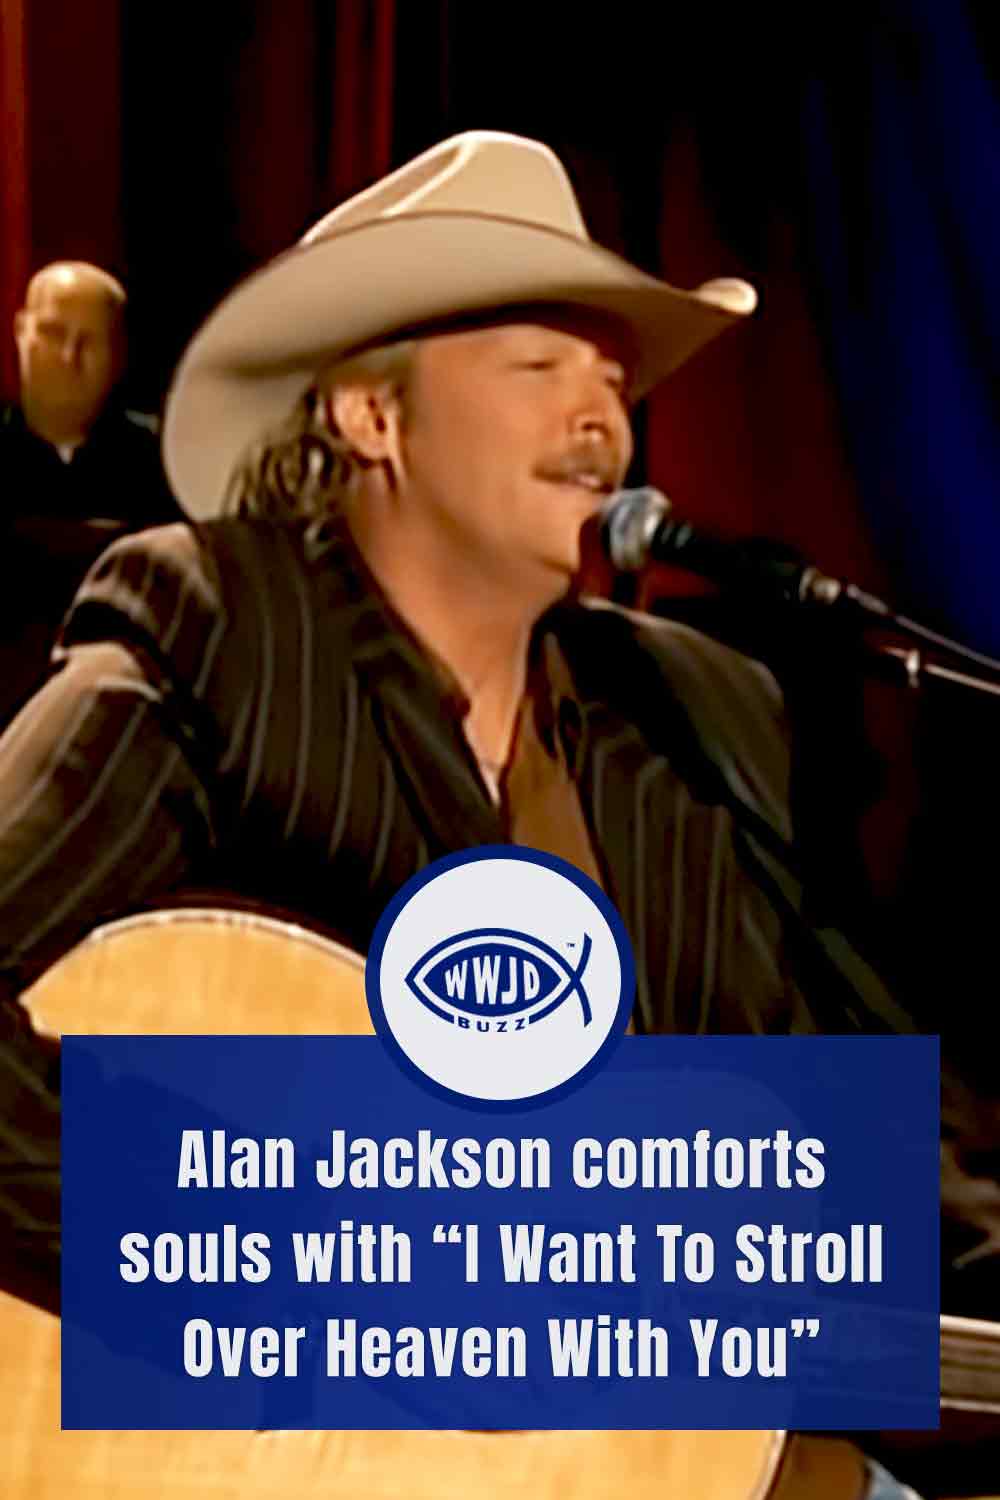 Alan Jackson comforts souls with “I Want To Stroll Over Heaven With You”